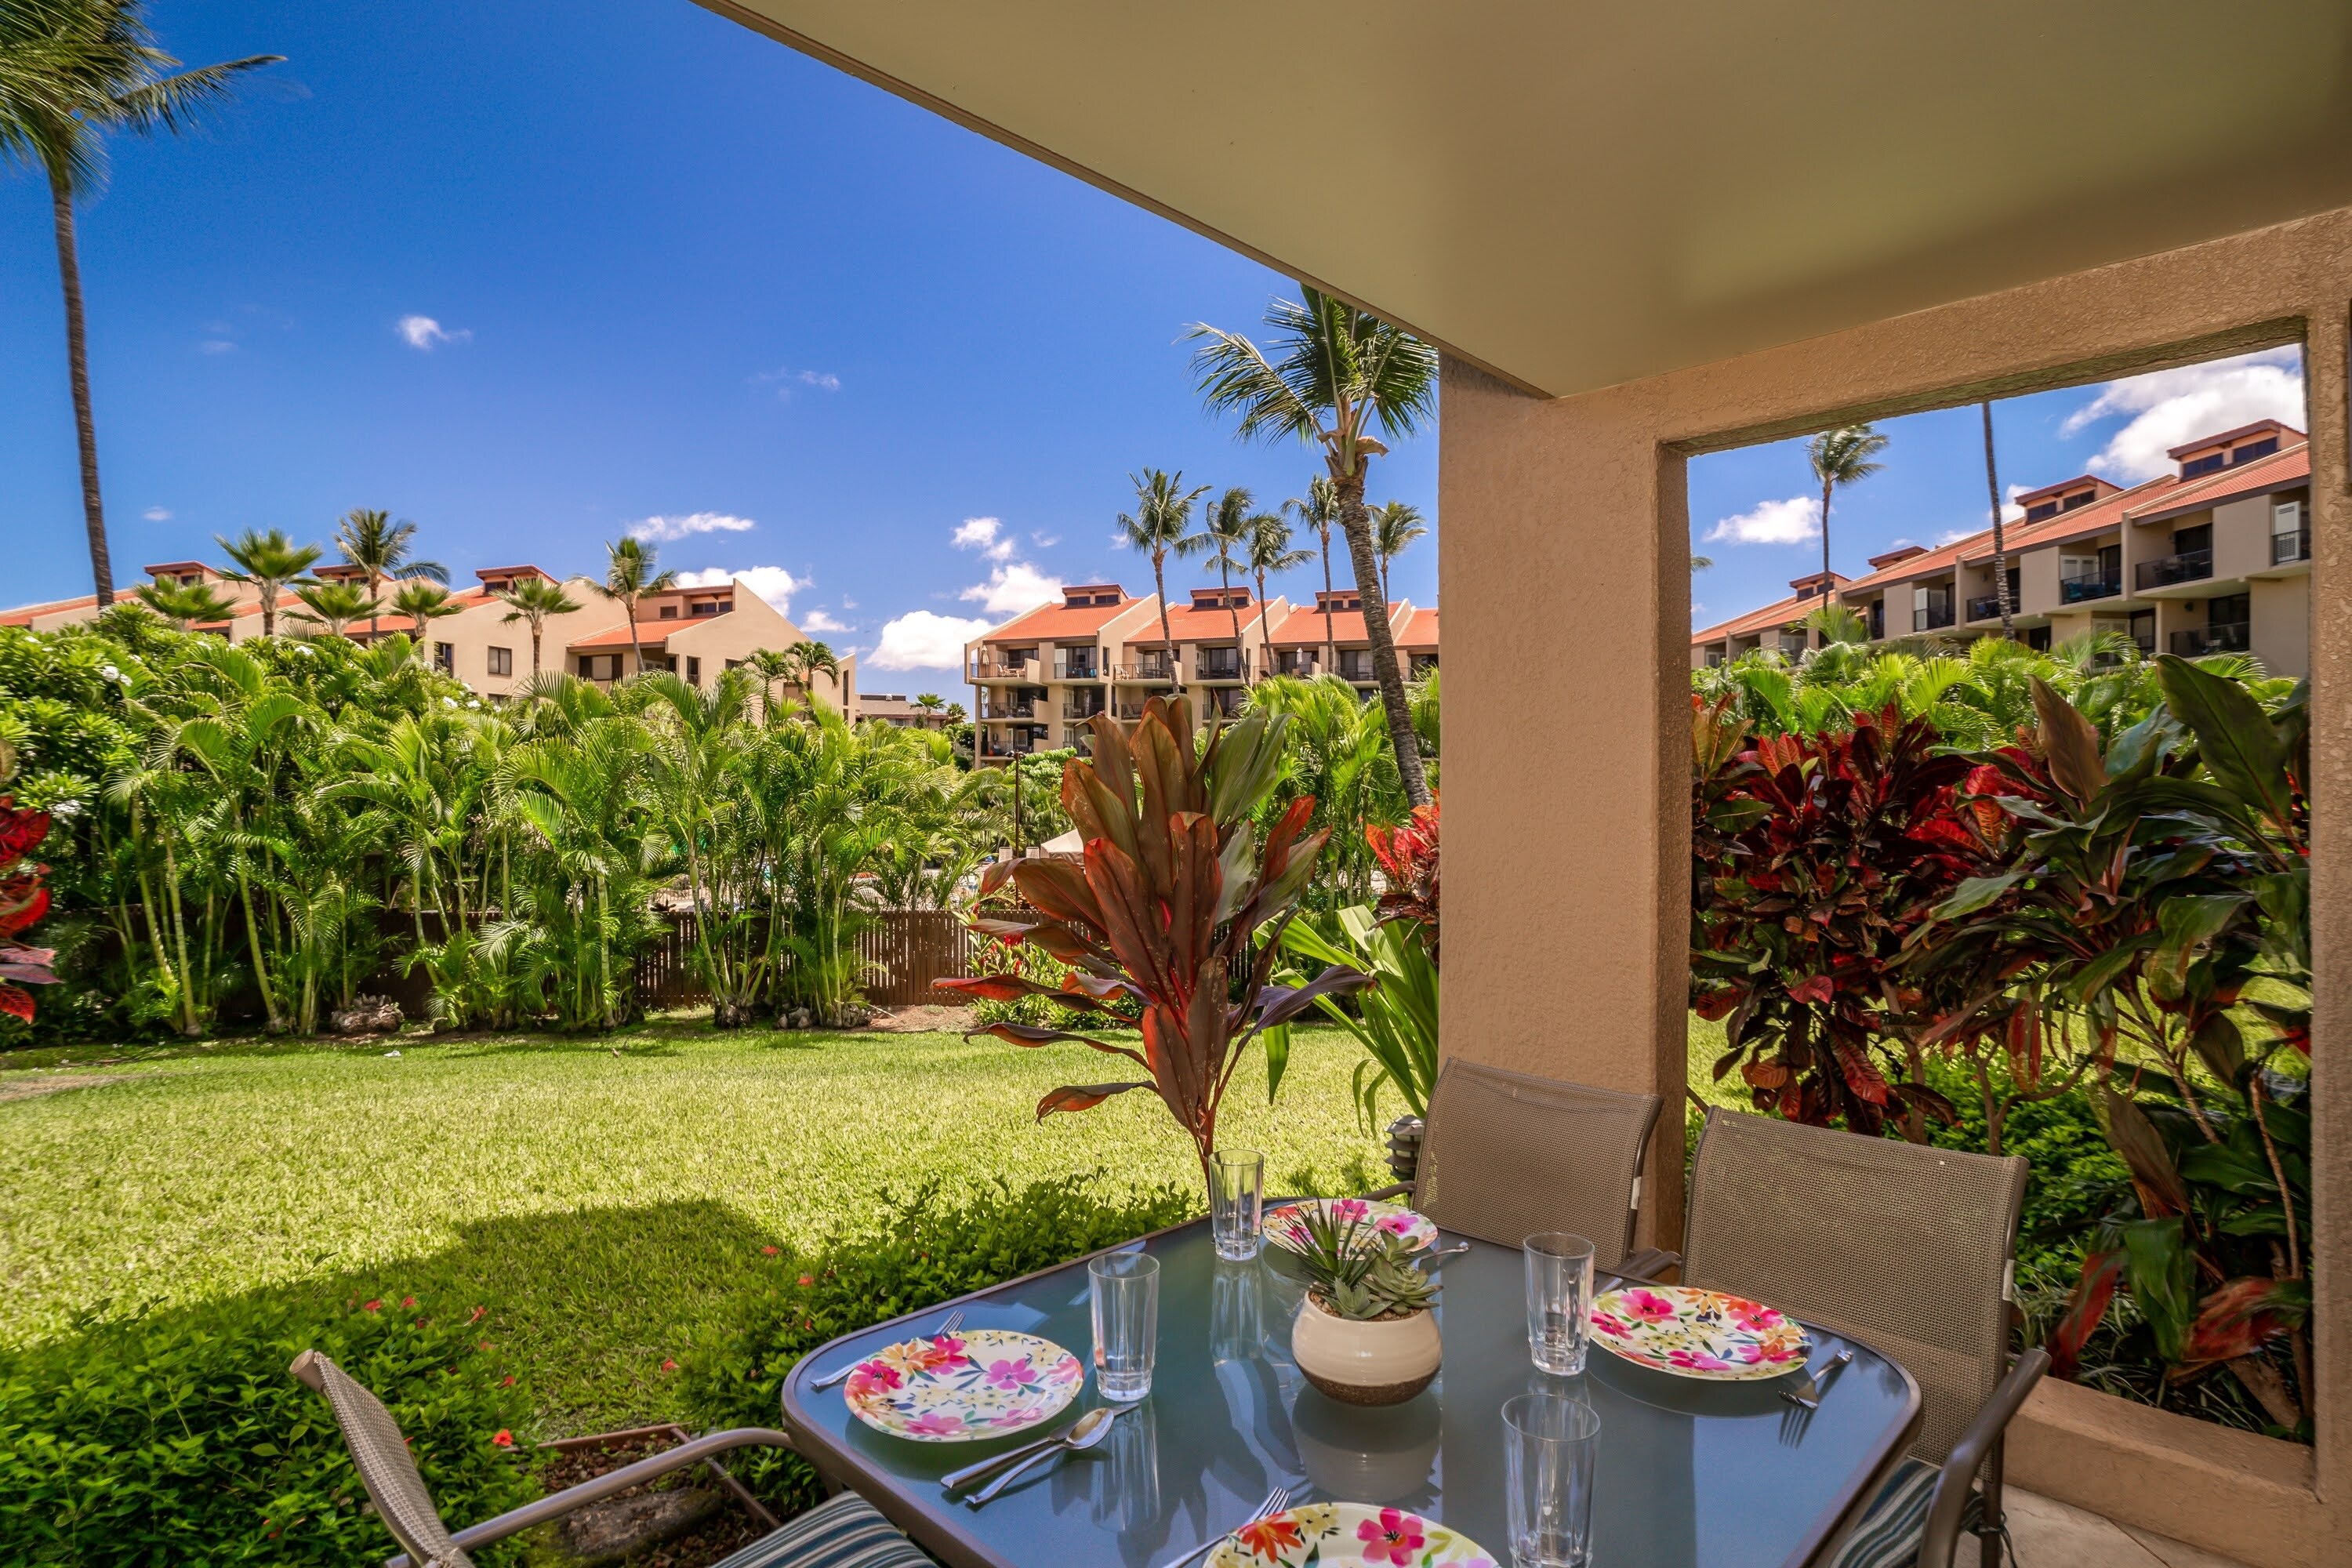 Enjoy your morning coffee on this private lanai